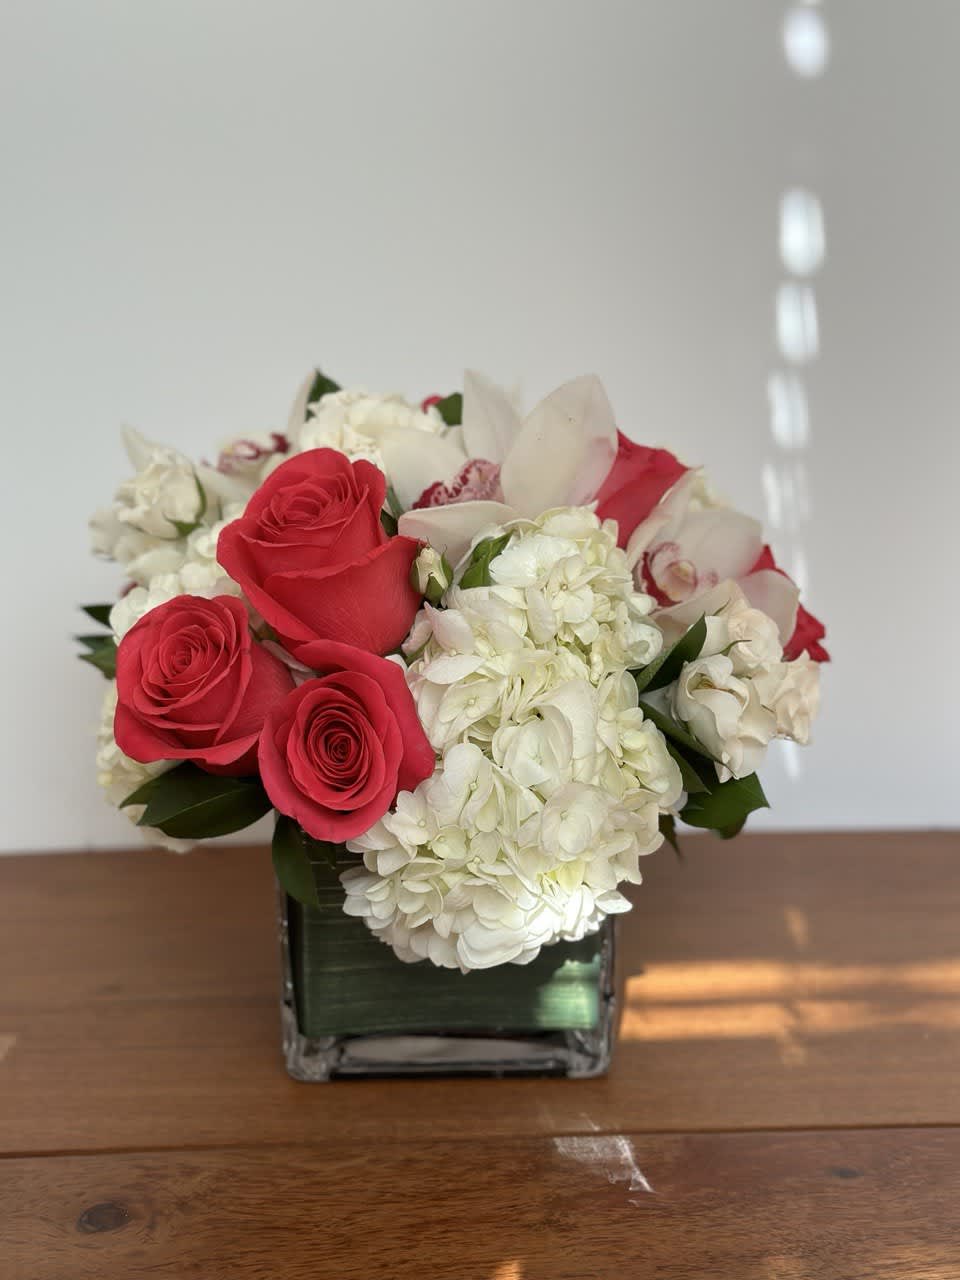 Classic and Beautiful, this arrangement whispers luxury. Pinks, whites and creams come